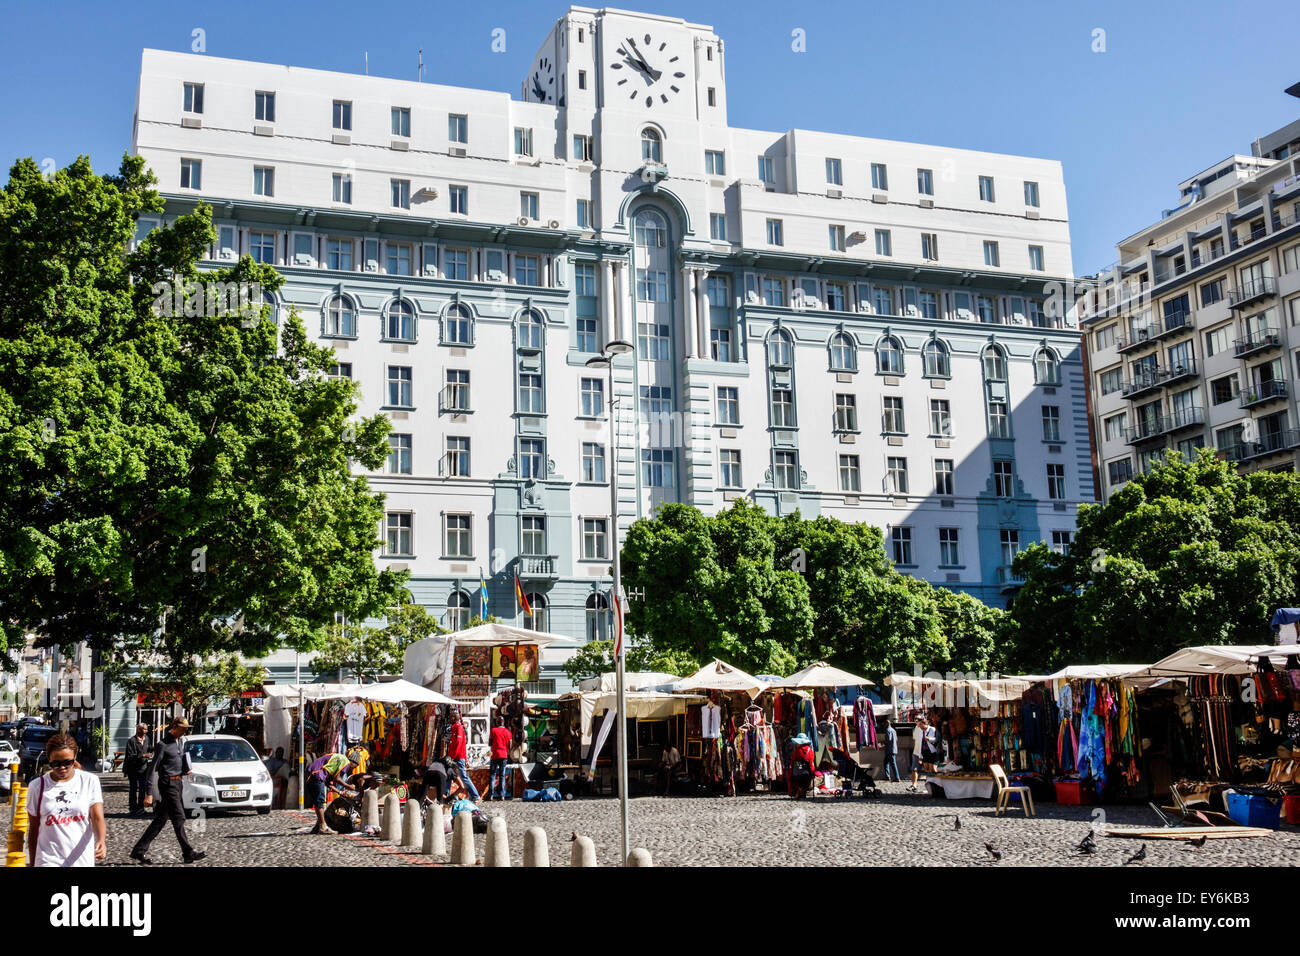 Cape Town South Africa,City Centre,center,Green Market Square,Three Cities Inn on the Square,hotel,vendor vendors stall stalls booth market marketplac Stock Photo